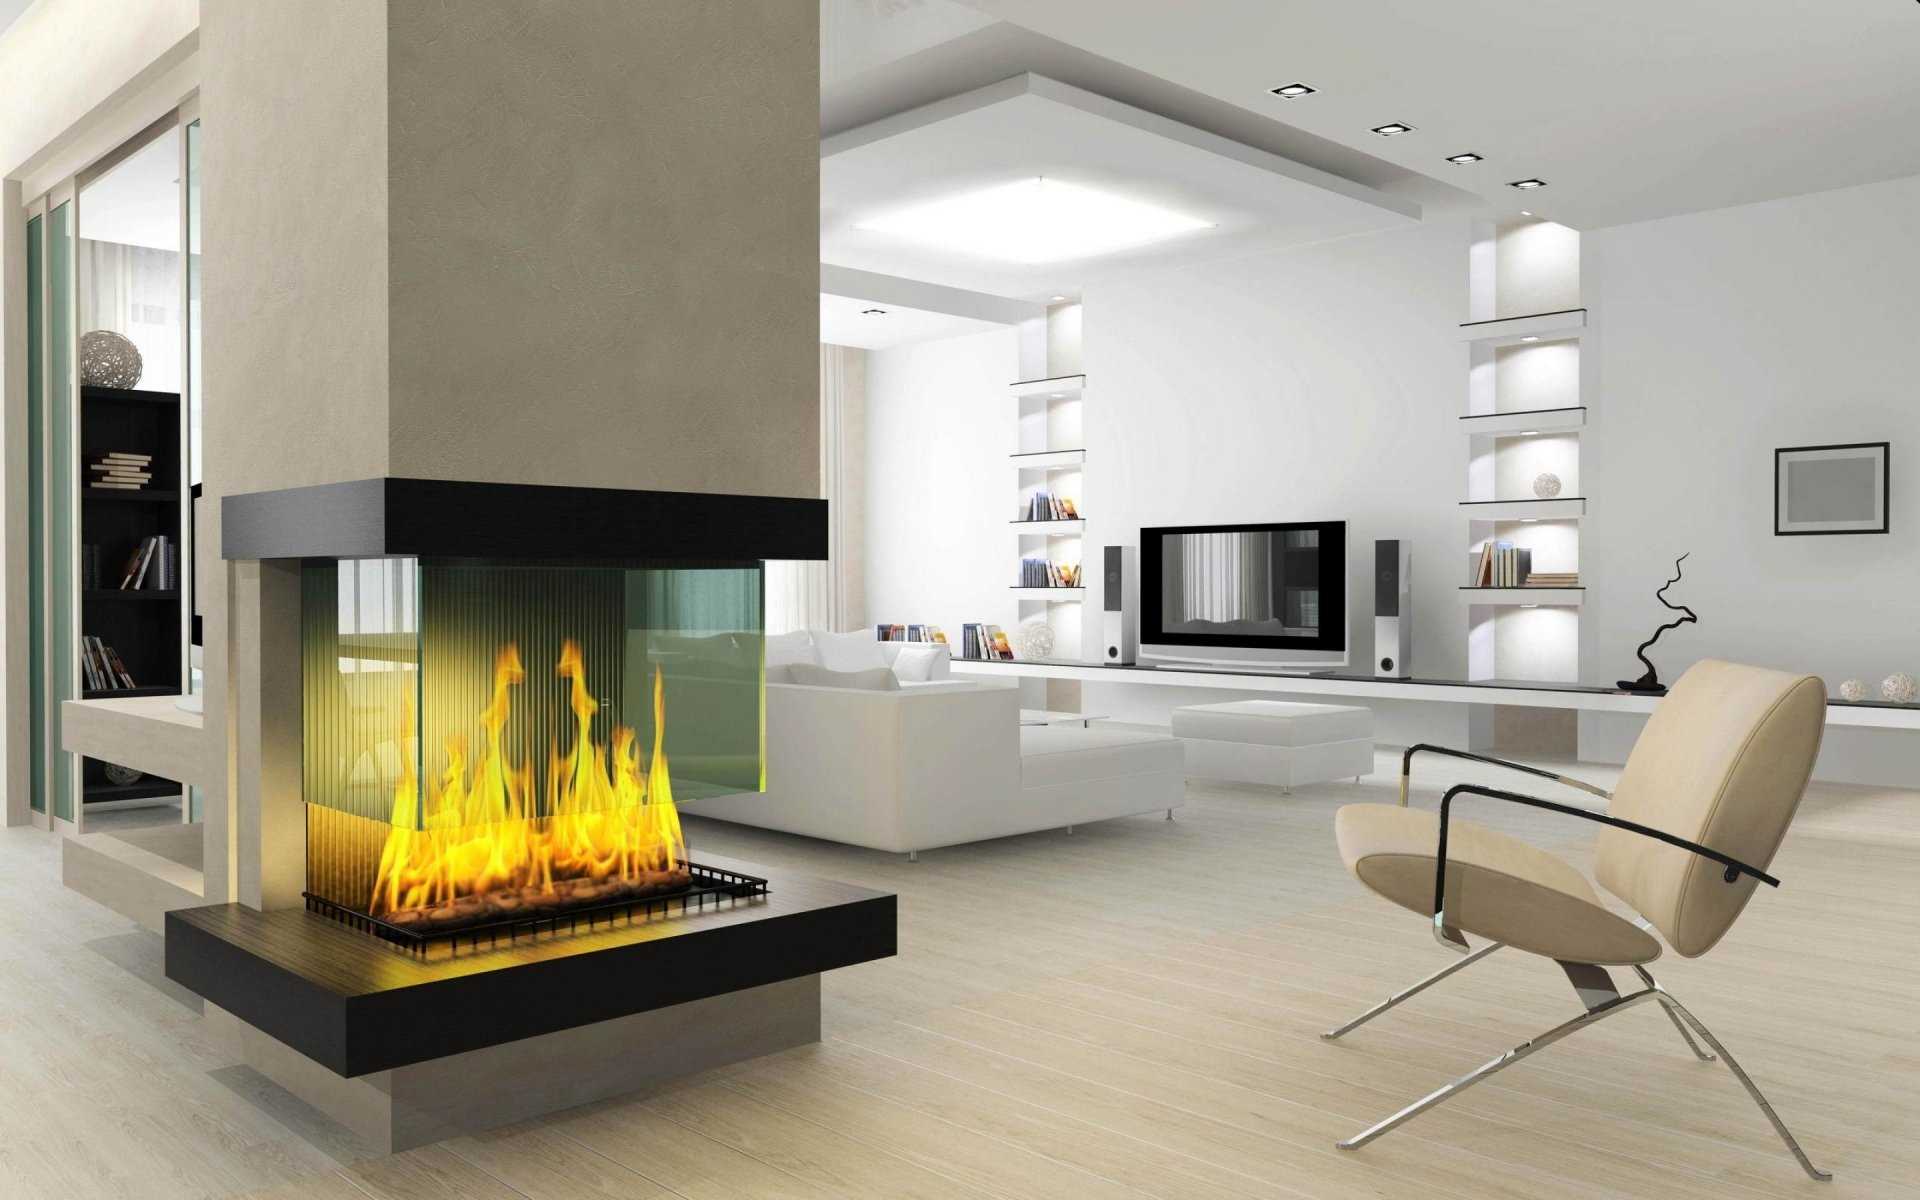 An example of an unusual decor of a living room with a fireplace